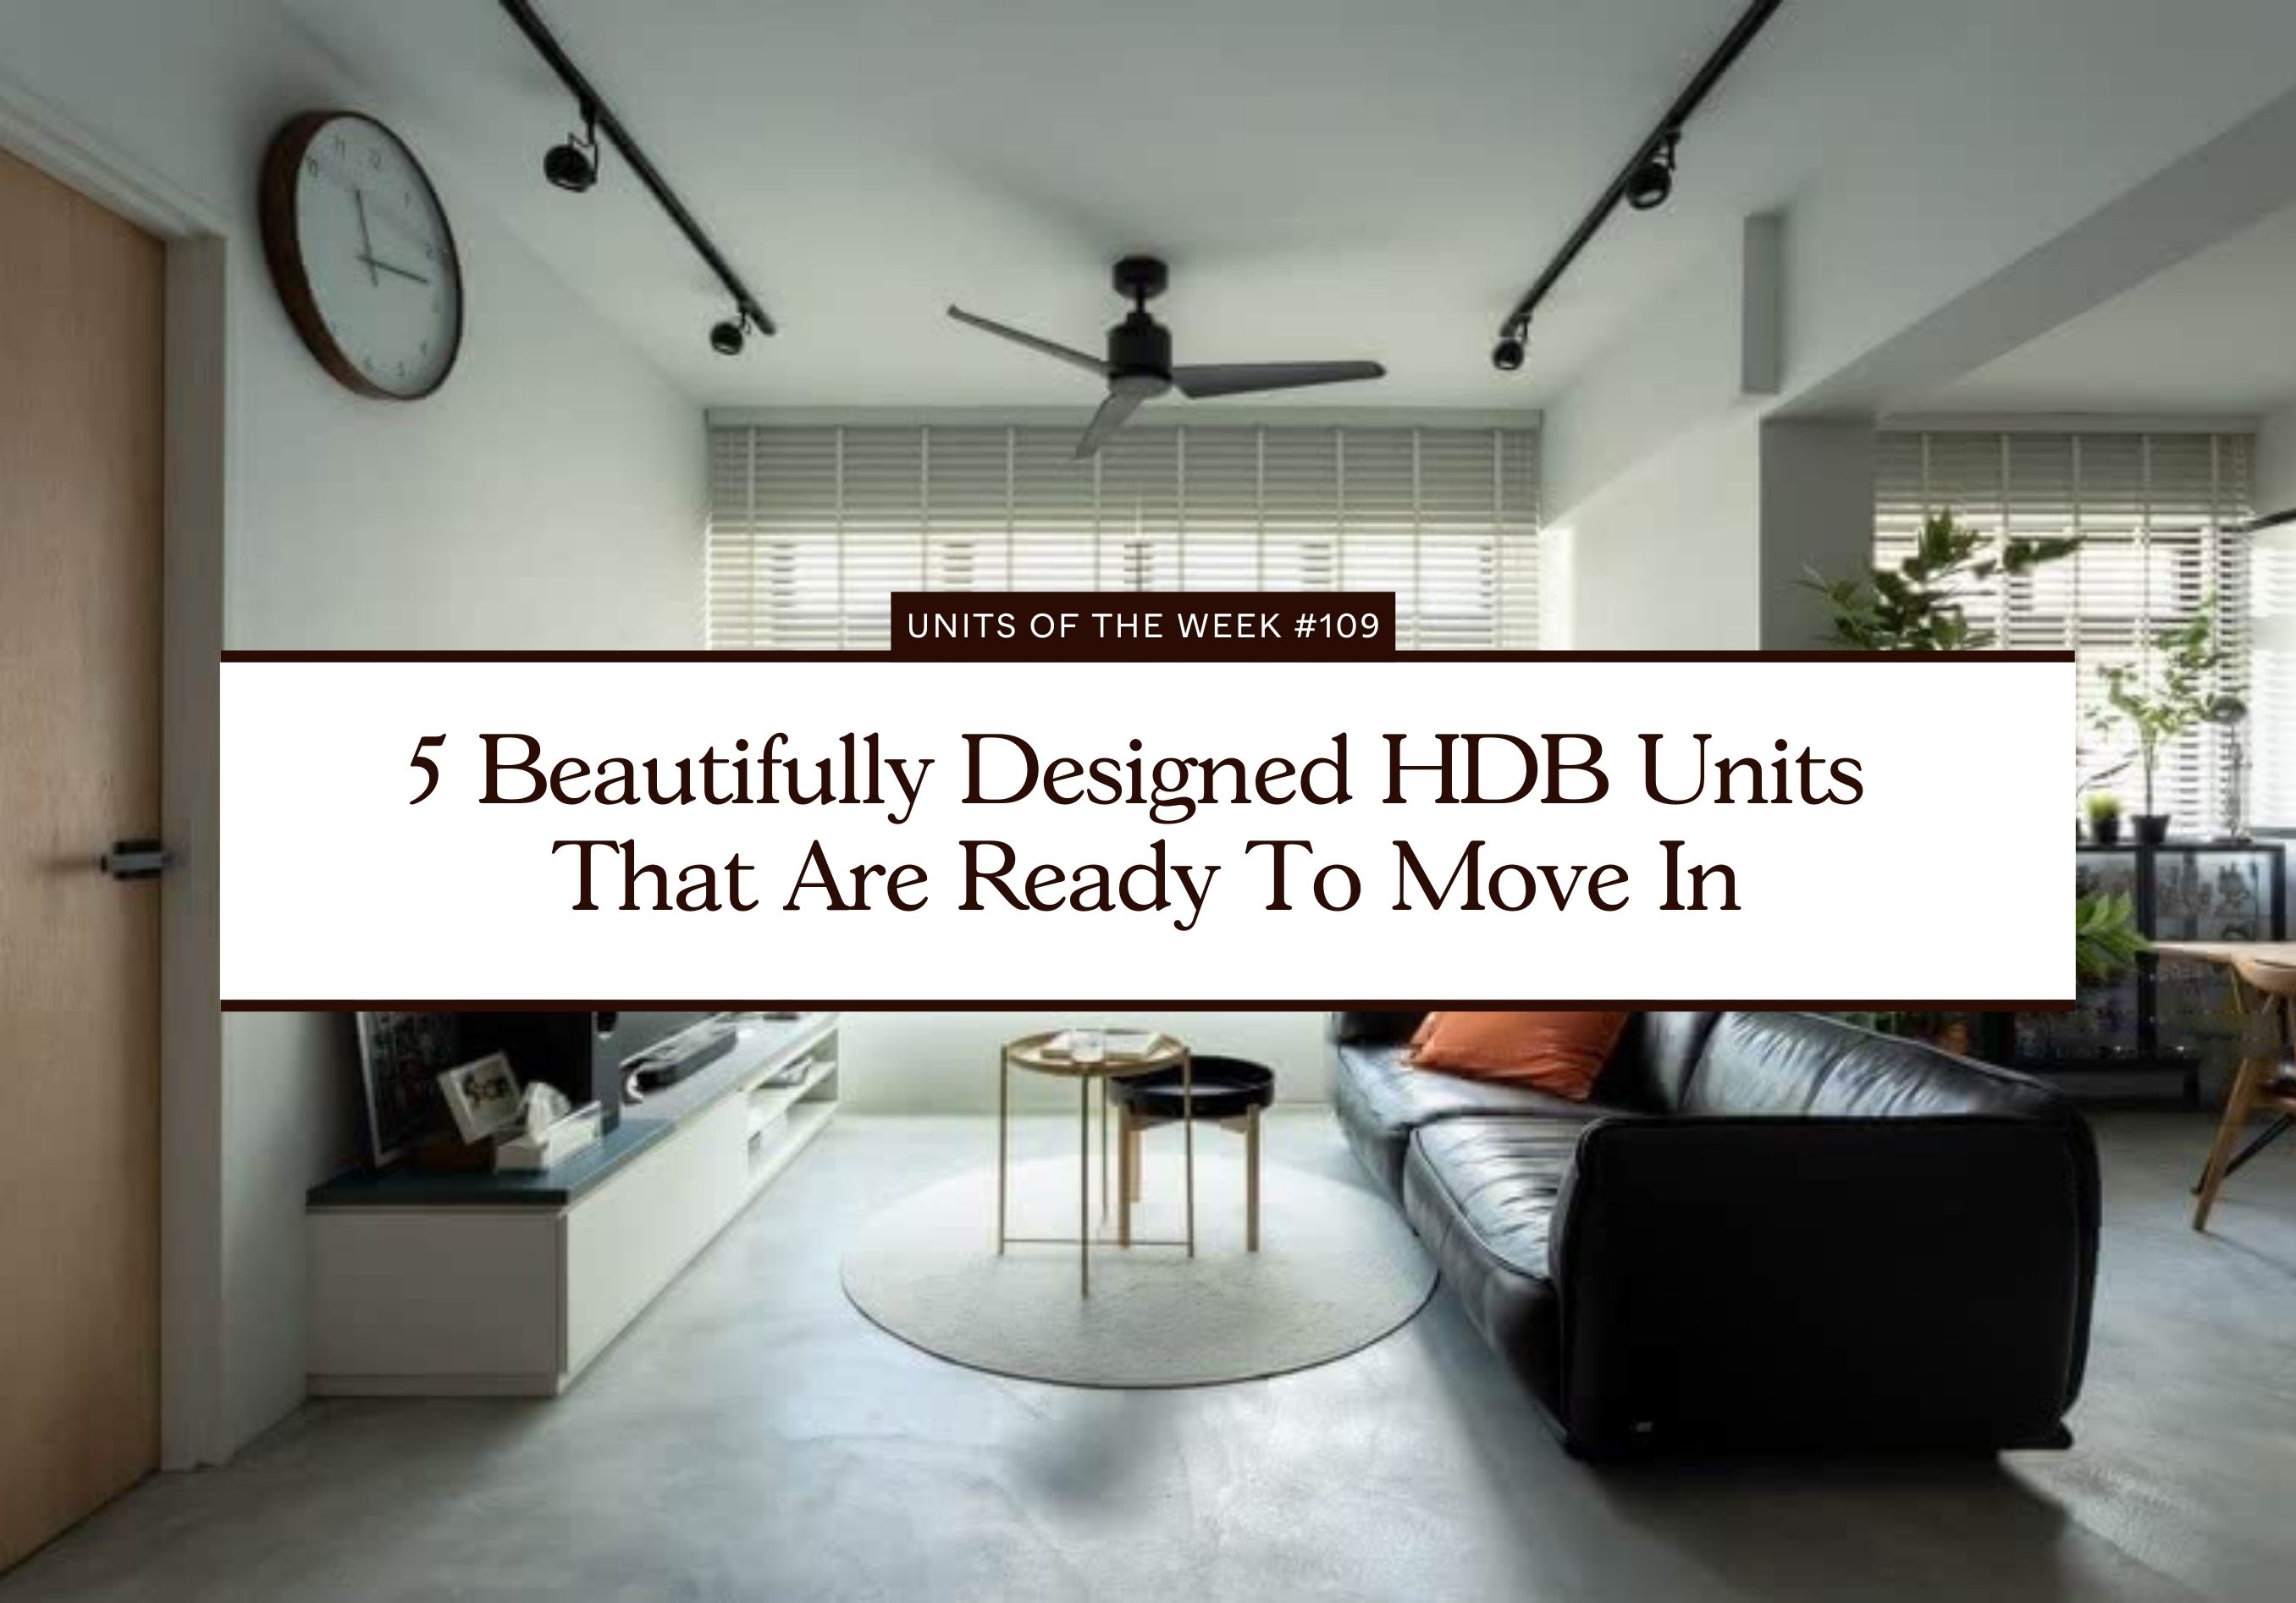 5 Beautifully Designed HDB Units That Are Ready To Move In